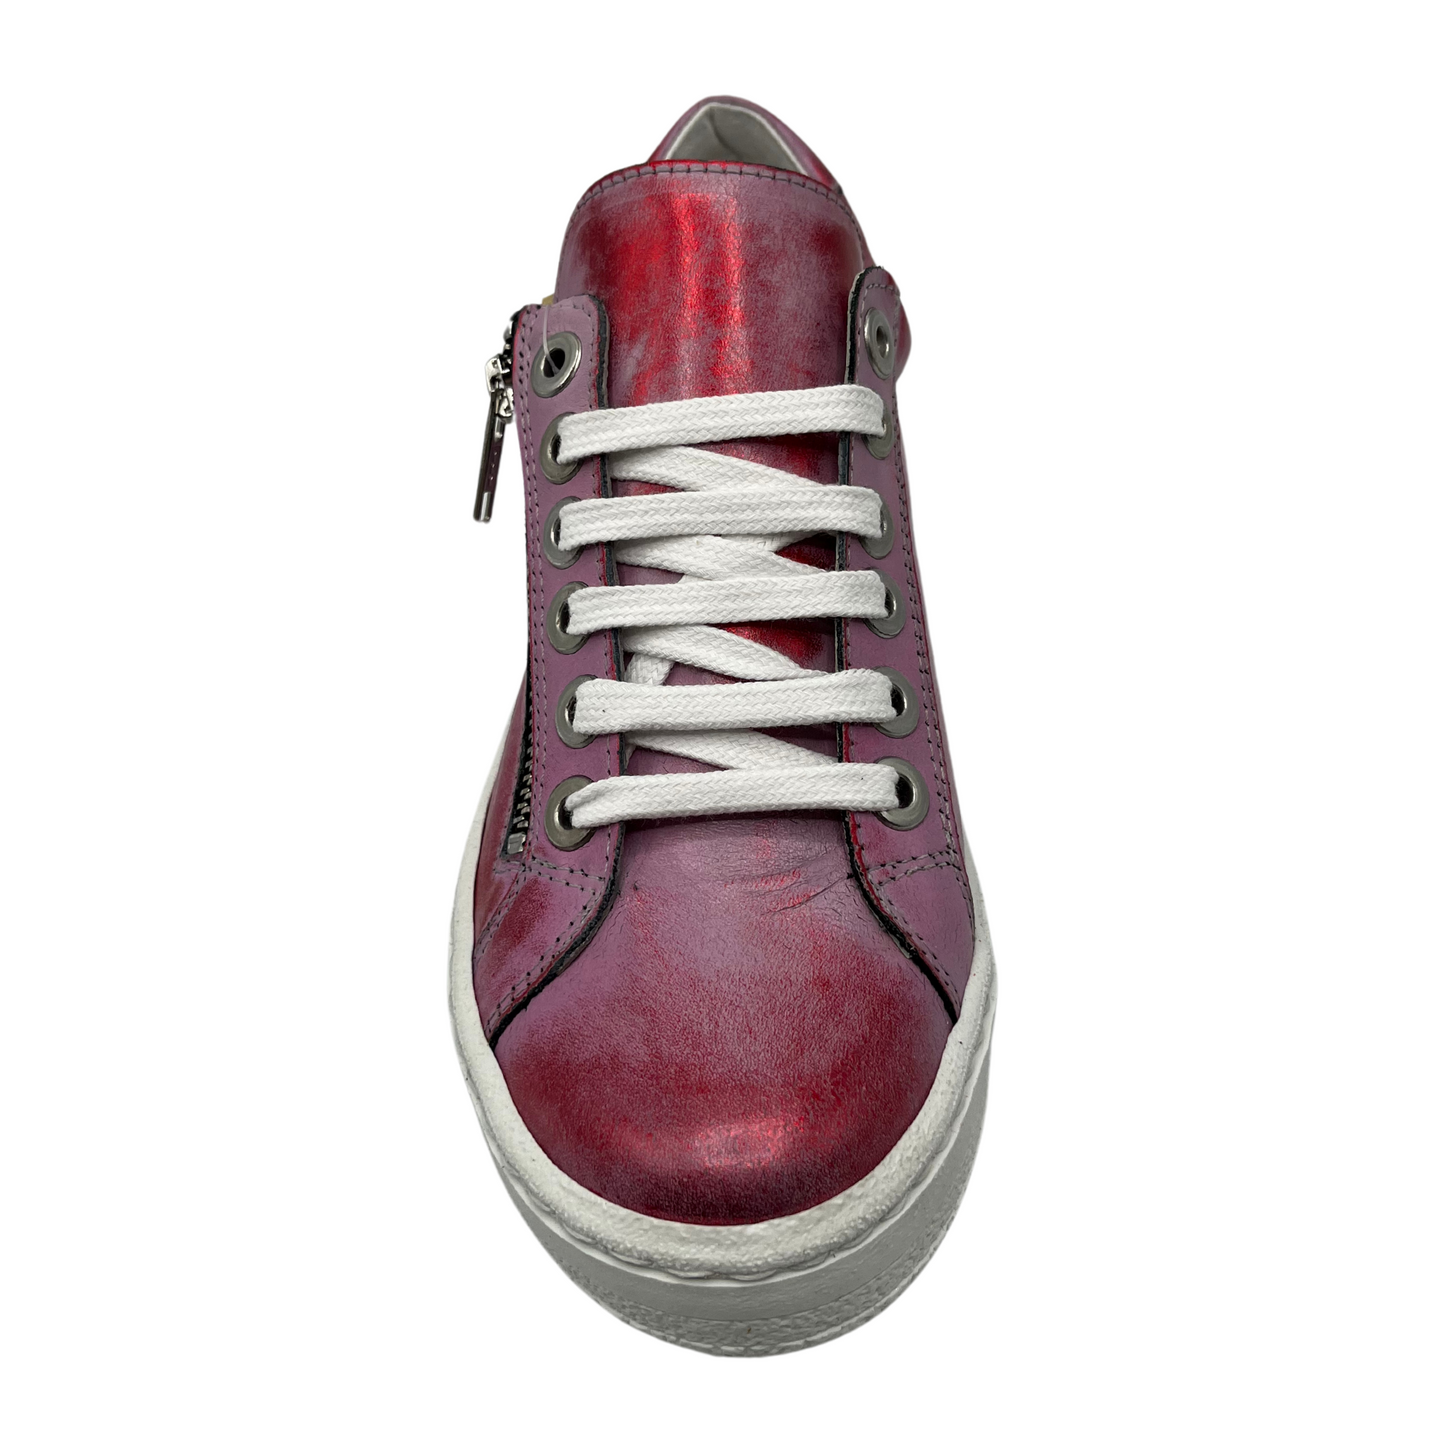 Top view of metallic red leather sneaker with white laces and side zipper closure